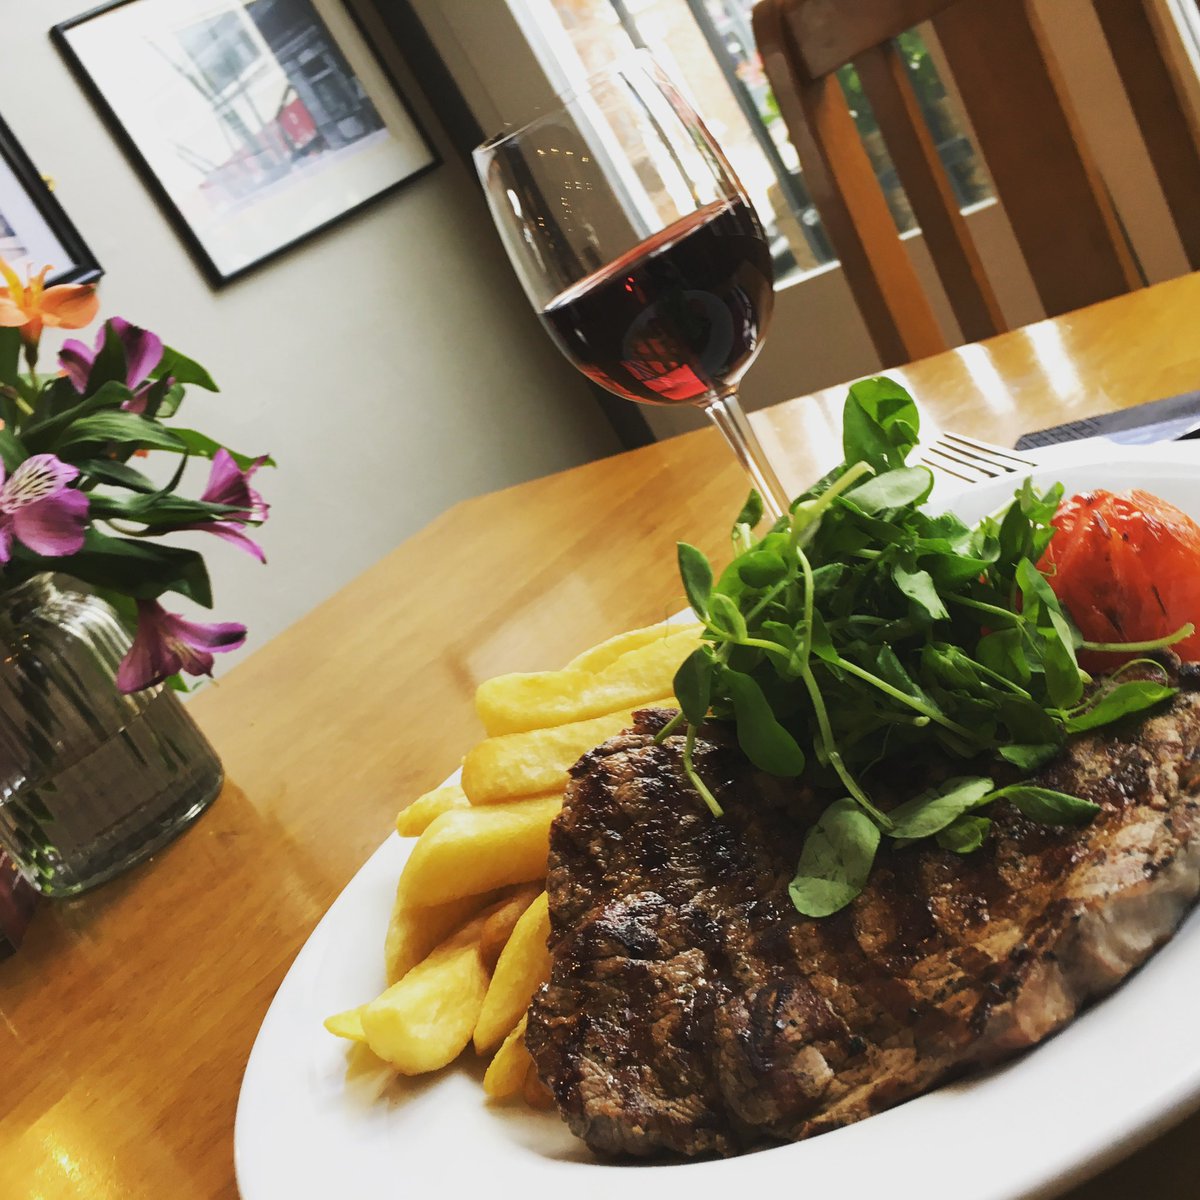 Thursday @Faulknerchester Join us for our set lunch 12-3pm 2 courses £15 / 3 courses £19 Steak & wine from 5pm Dry aged 10oz rump steak, chips, grill garnish and wine £15.95 Feel free to walk in or if you’d rather reserve a table then call 01244 328195 or book online